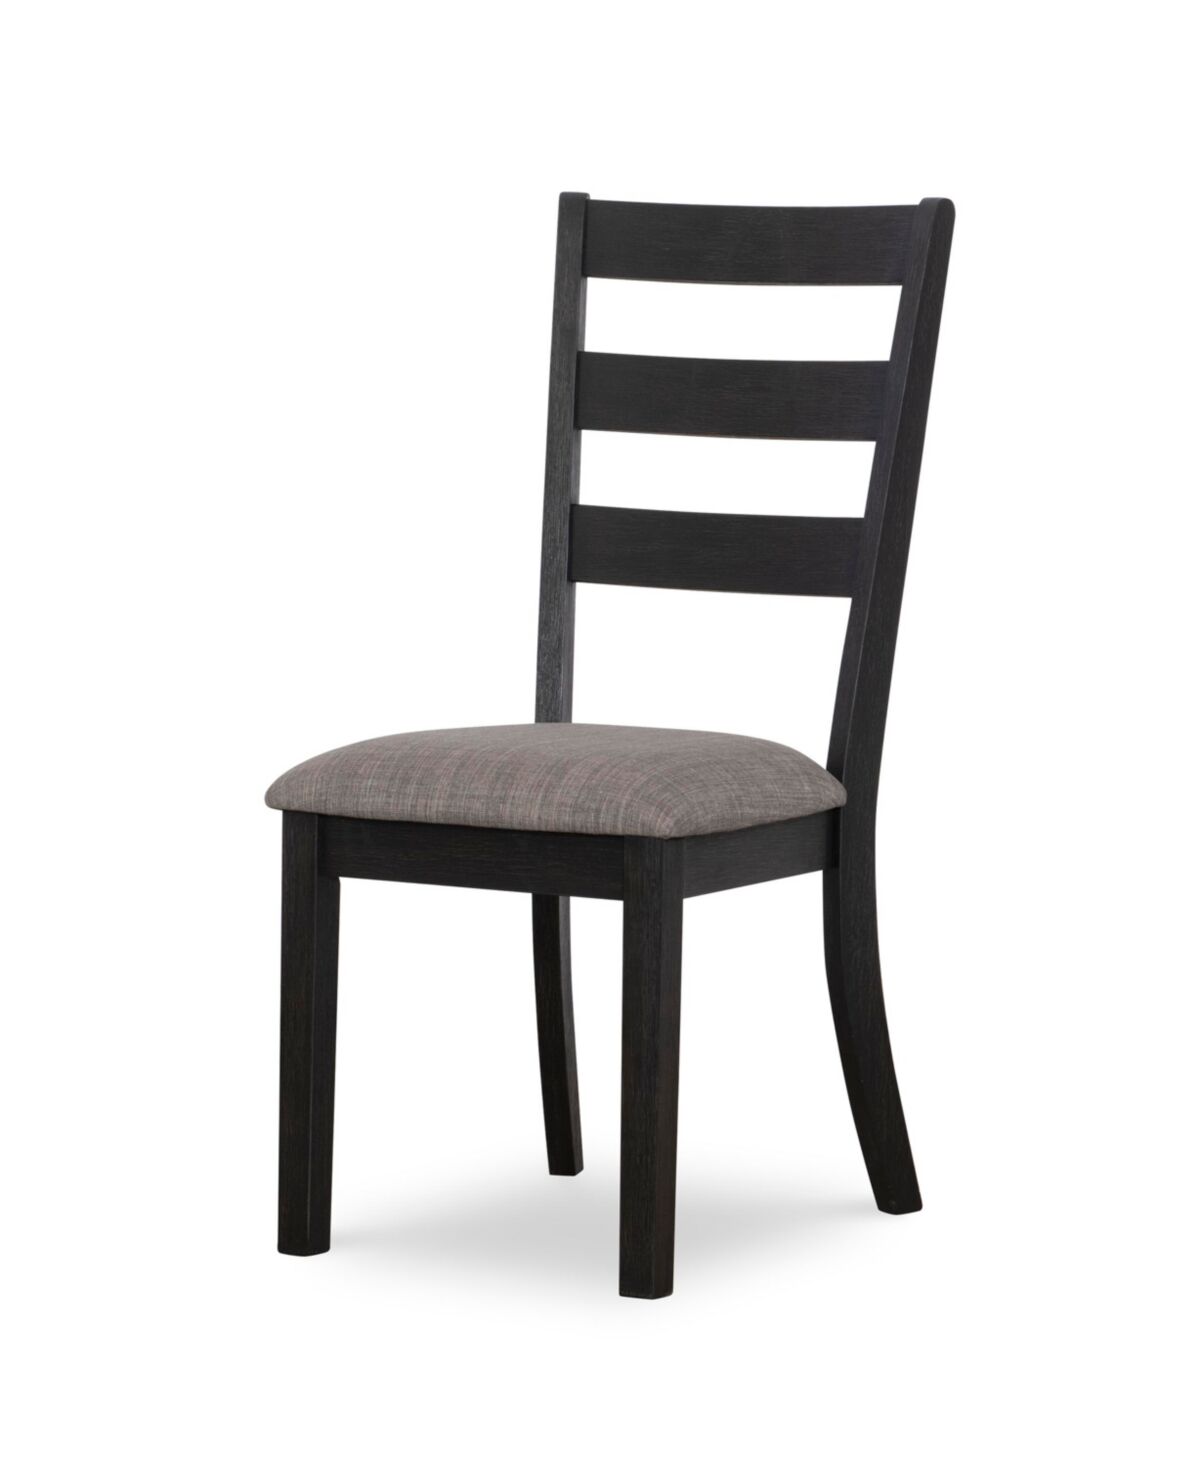 Home Furniture Outfitters Ansel Black Dining Chair - Black